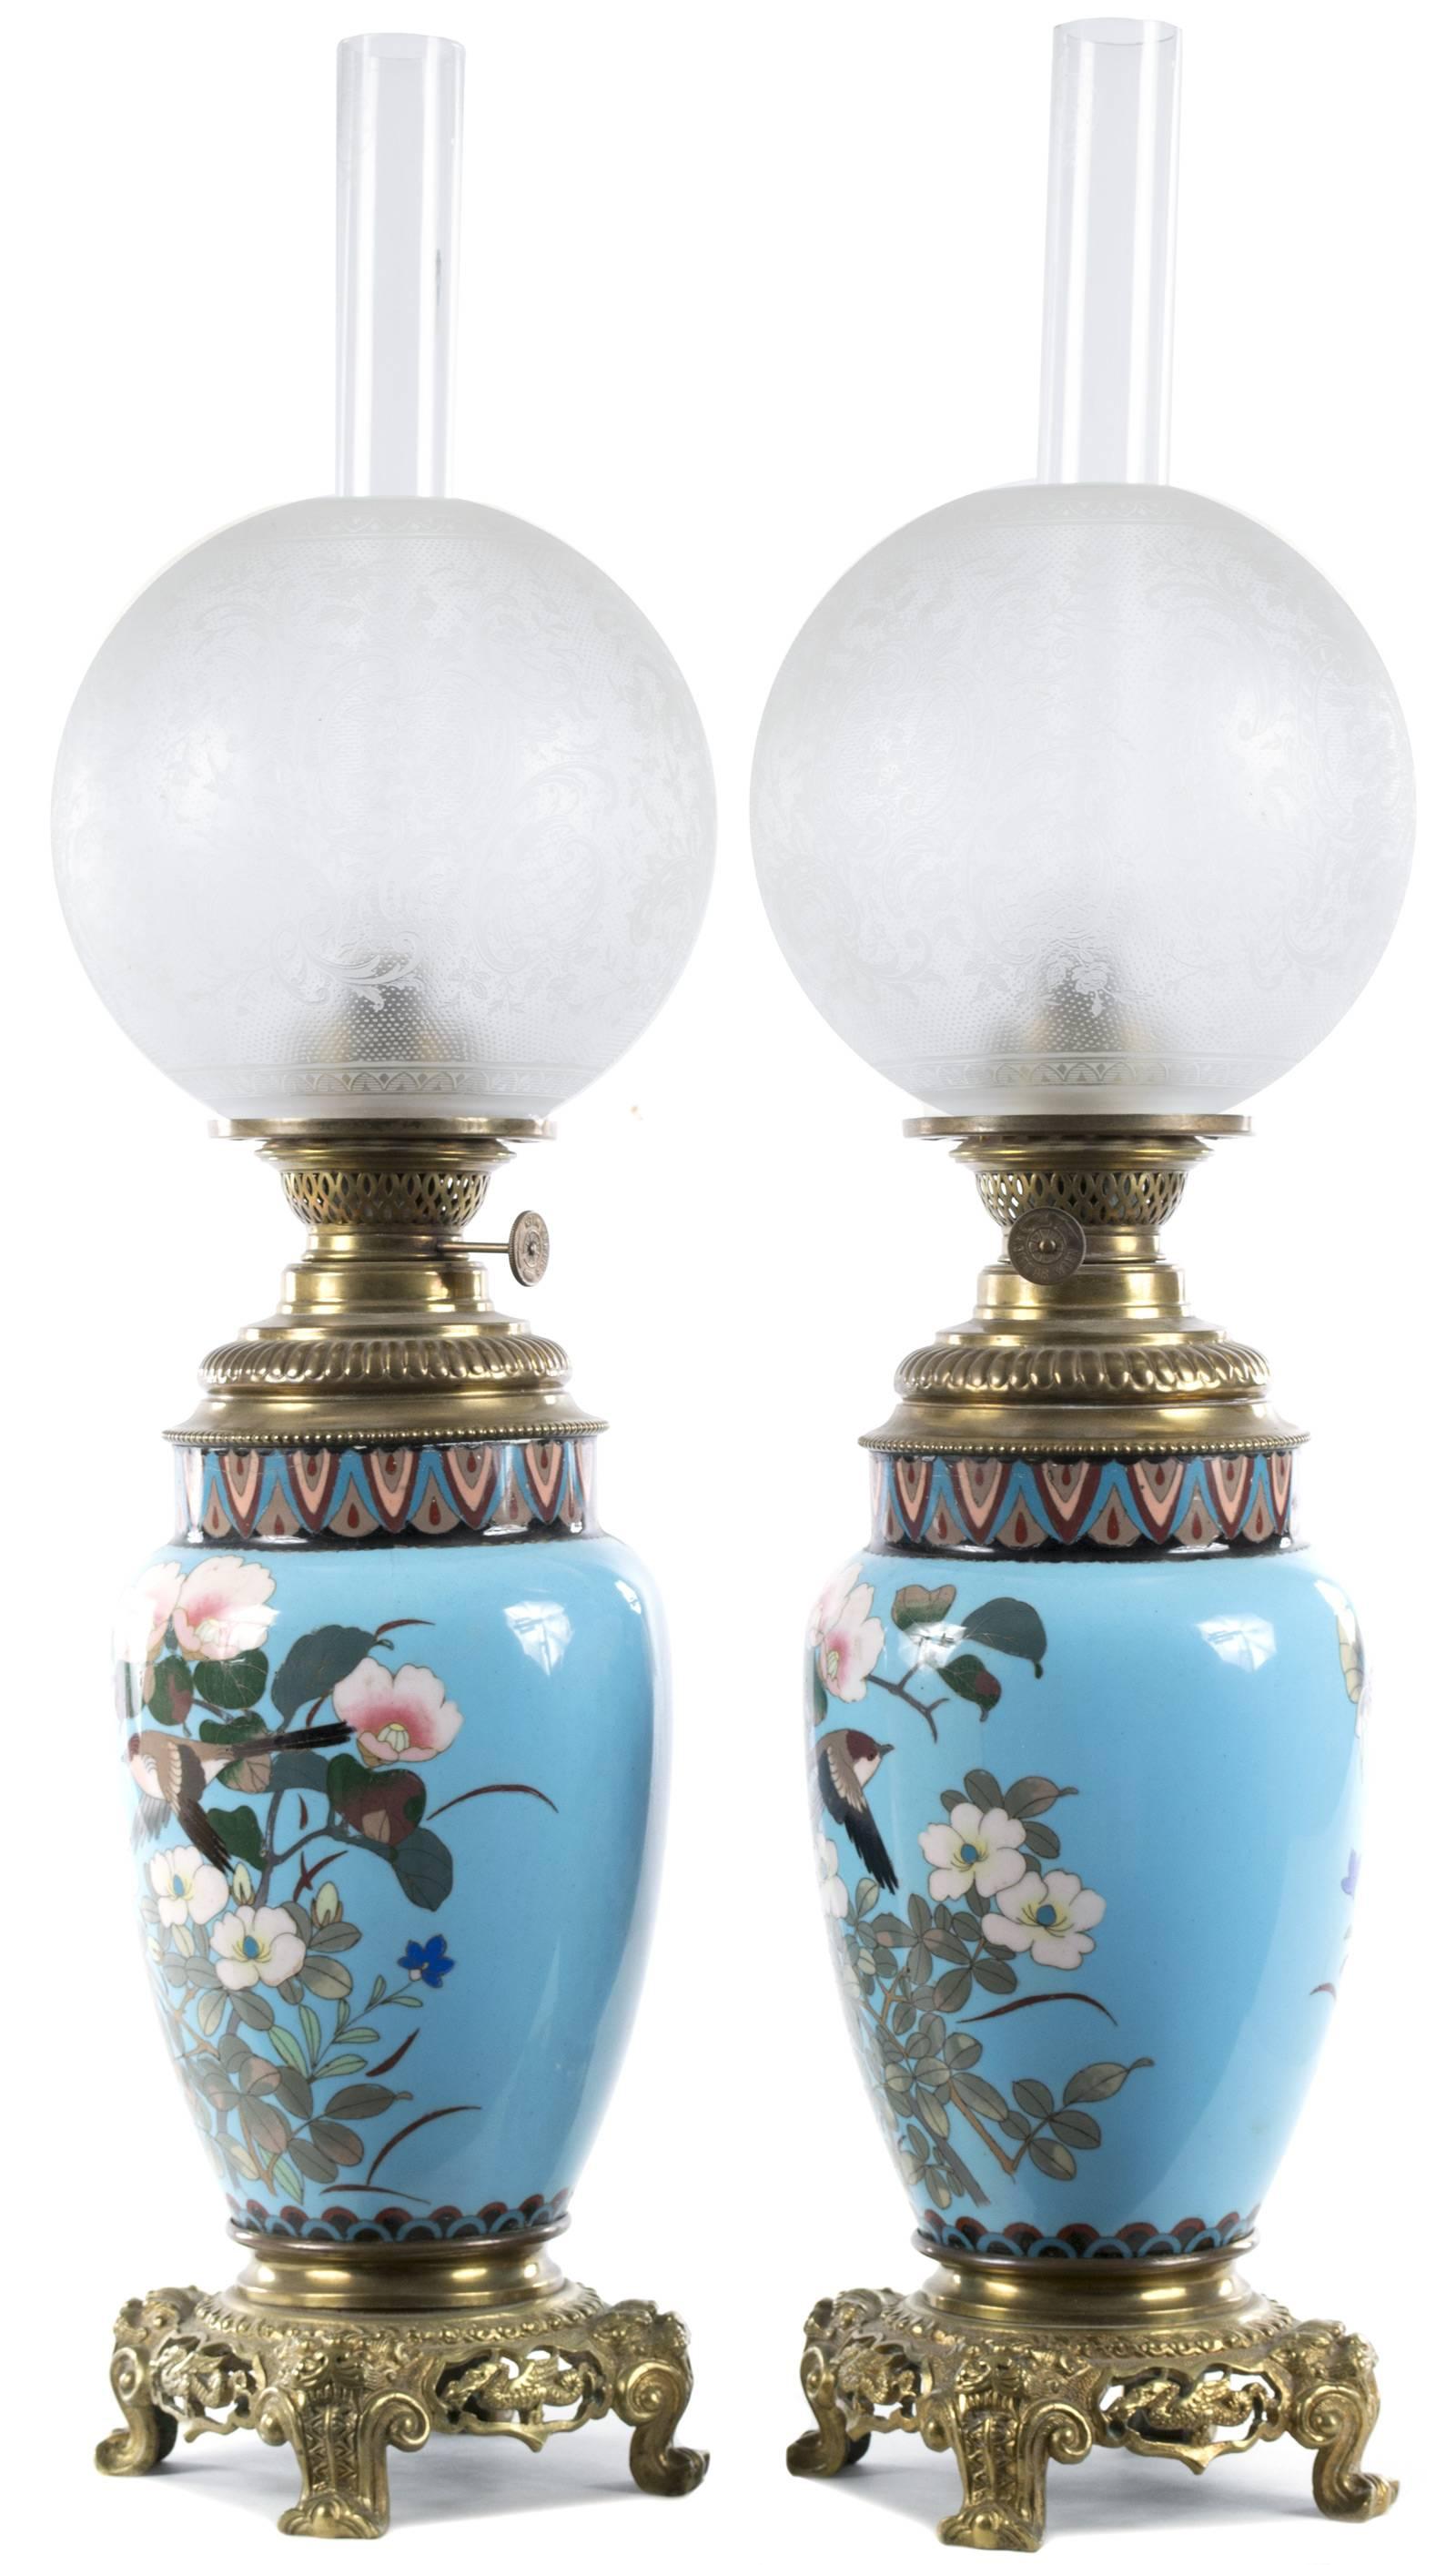 Japanese Pair of Meiji Cloisonné Lamps with French Ormolu Fittings